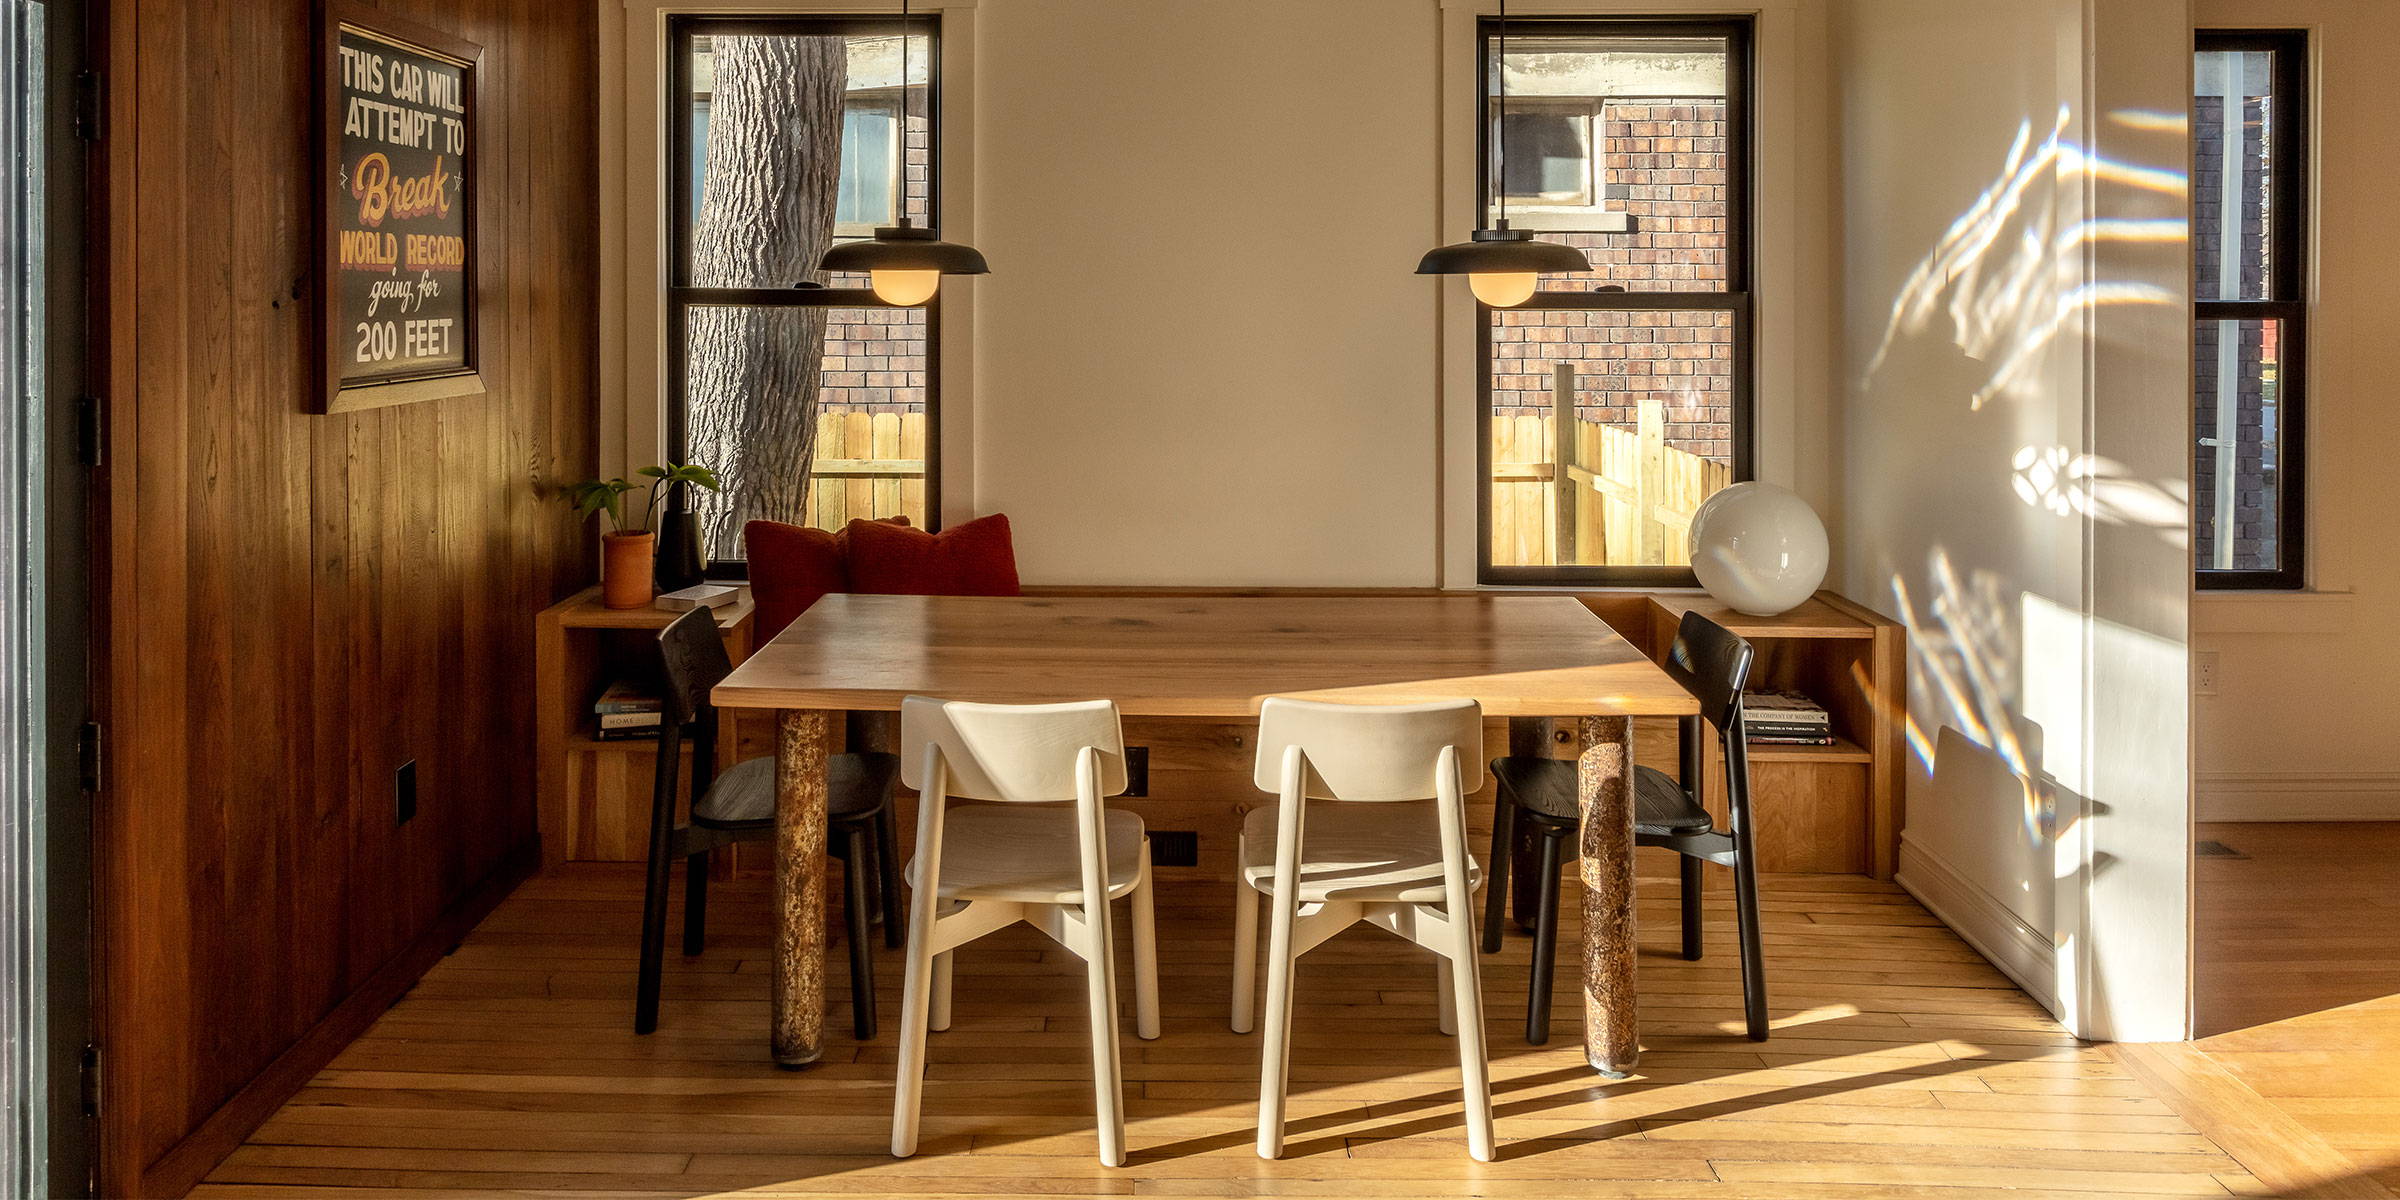 A dinning room in Detroit, MI featuring modern interior design and a reclaimed white oak table designed by Woodward Throwbacks.